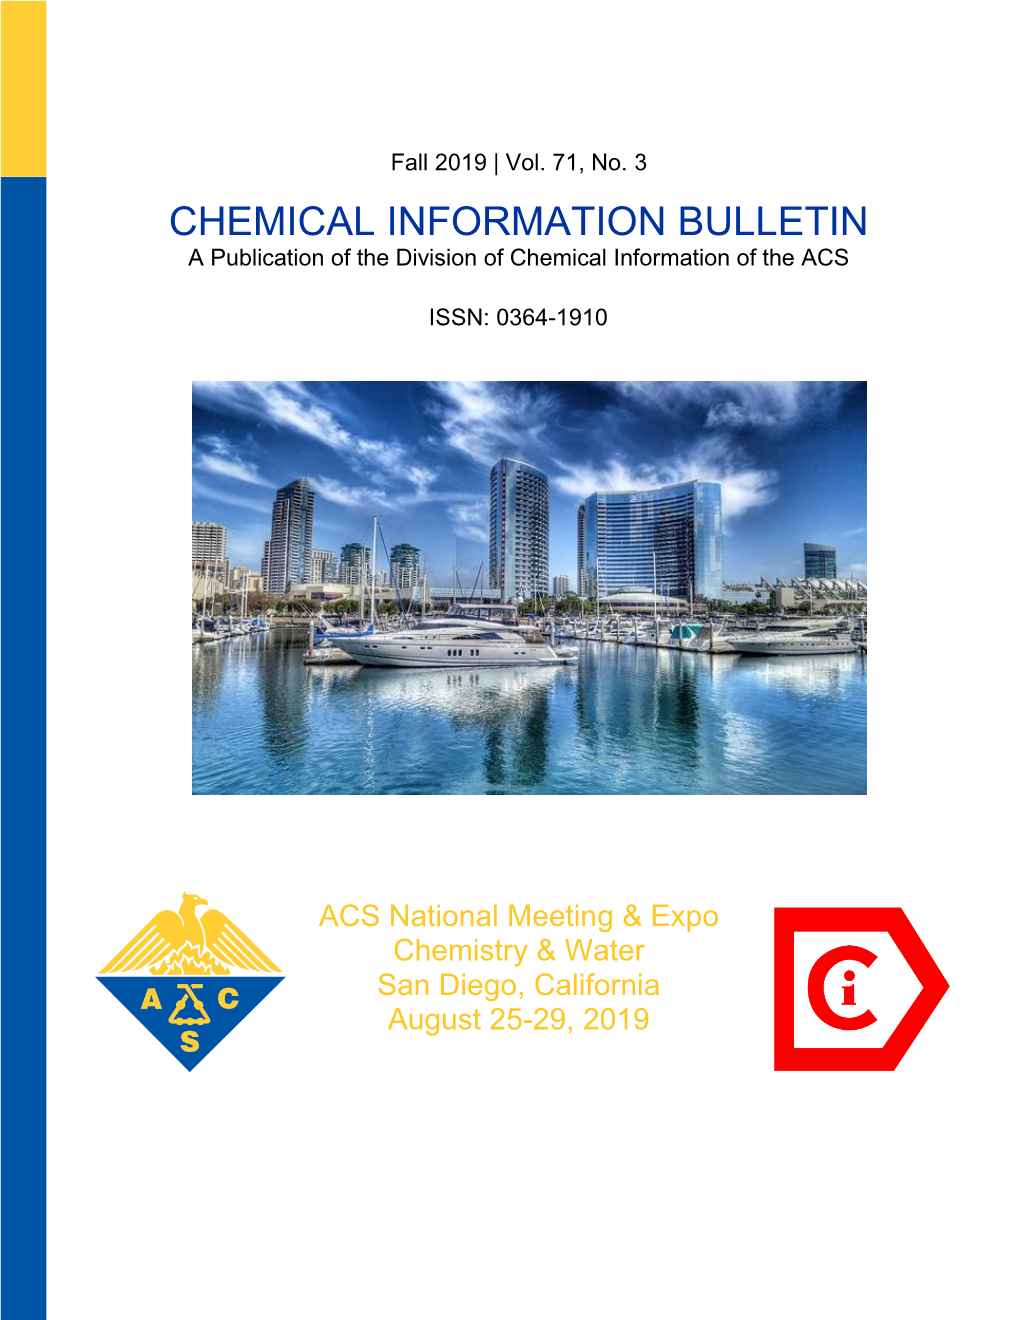 CHEMICAL INFORMATION BULLETIN a Publication of the Division of Chemical Information of the ACS